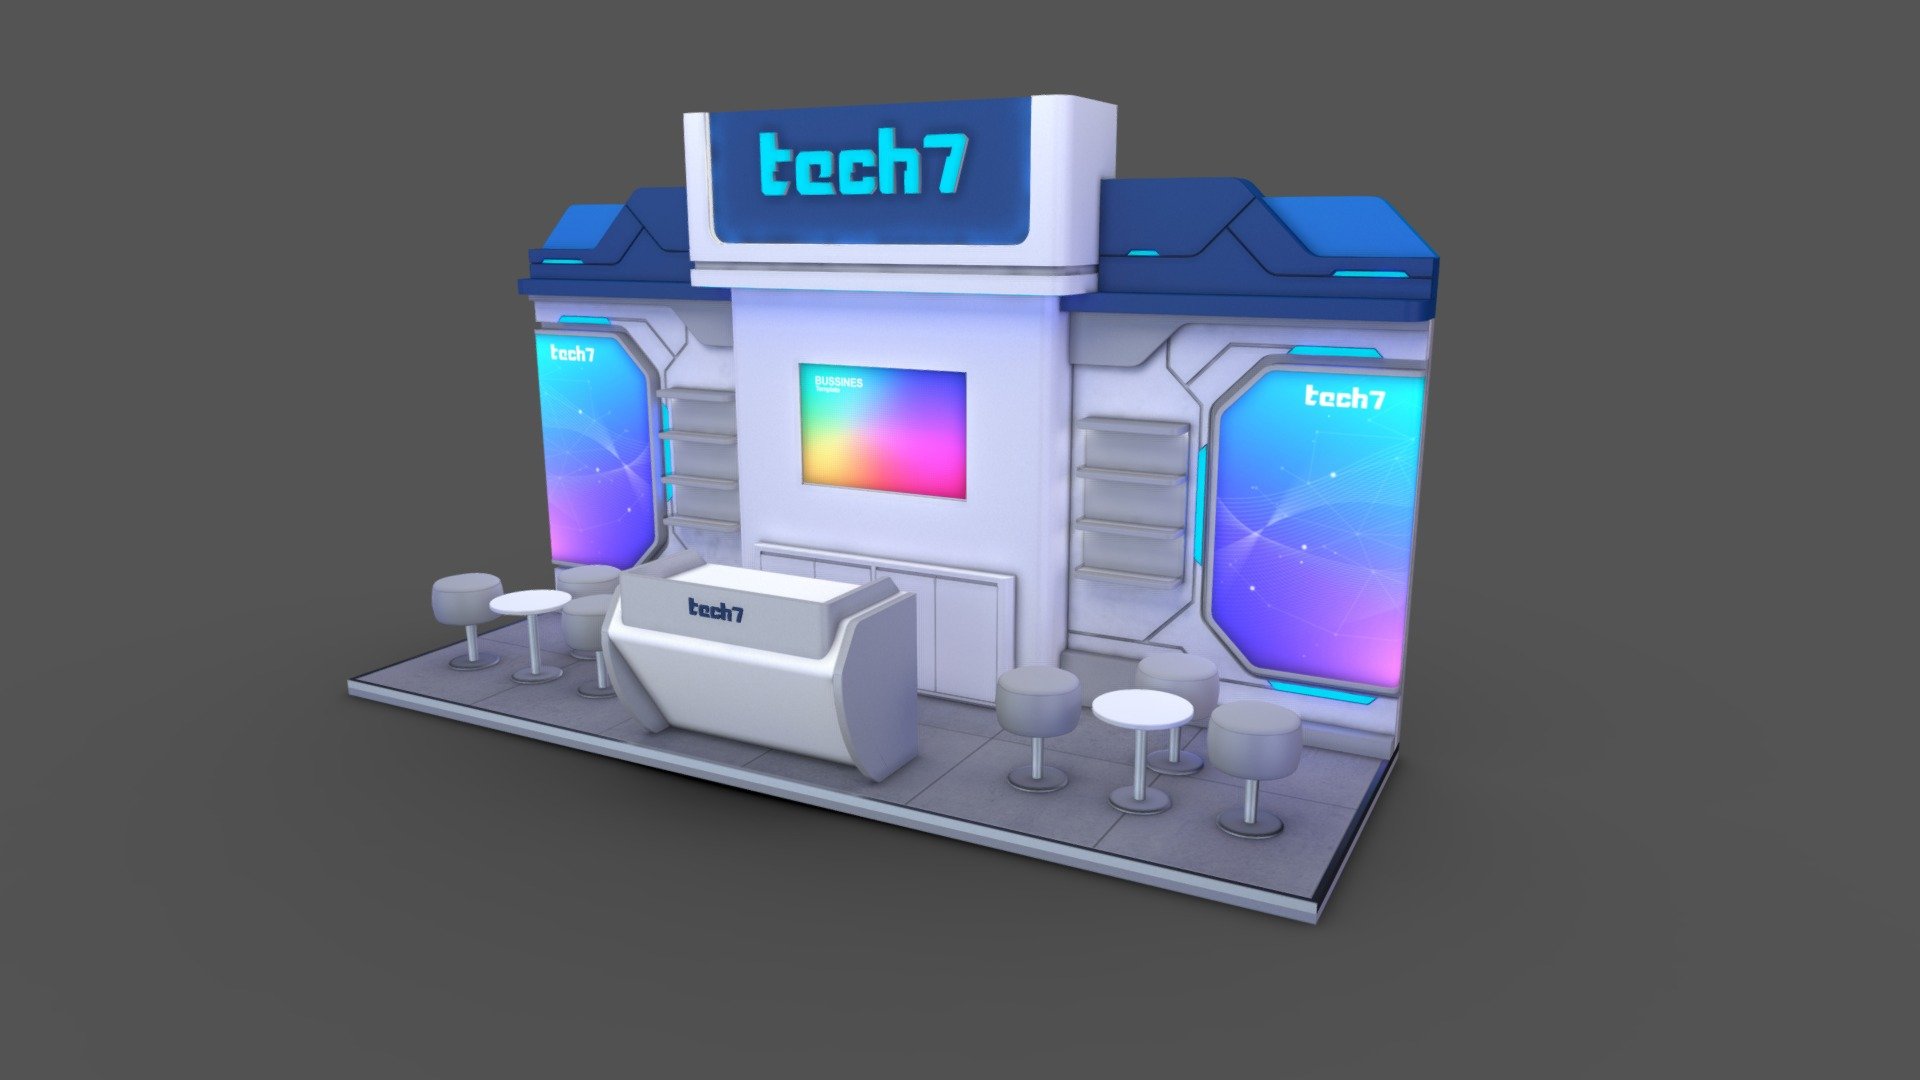 Exhibition - Stand / booth / stall  - Design

12 Sqm / 6x2m / 3 Exposed sides

Format: 

1. Autodesk 3Ds max 2020 / V ray 5

2. Autodesk 3Ds max 2017 / Default scanline

3. Obj Format





EXHIBITION STAND_2203_obj standard map




EXHIBITION STAND_2203_obj V ray complete map



4. Fbx format





EXHIBITION STAND_2203_fbx standard map




EXHIBITION STAND_2203_fbx V ray complete map



Unit: cm

thank you for visiting

If you are interested in other models, please visit my collection



EXHIBITION STAND 36 Sqm
https://sketchfab.com/fasih.lisan/collections/exhibition-stand-36-sqm-34b6419aa7ec4556b18d8a381c51db77

EXHIBITION STAND 18 Sqm
https://sketchfab.com/fasih.lisan/collections/exhibition-stand-18-sqm-9a22add1012e4c36961b6e1db26a0280

EXHIBITION STAND 9 sqm
https://sketchfab.com/fasih.lisan/collections/exhibition-stand-9-sqm-2afc738a25634768ba5335da876876f2 - EXHIBITION STAND 2203 12 Sqm - Buy Royalty Free 3D model by fasih.lisan 3d model